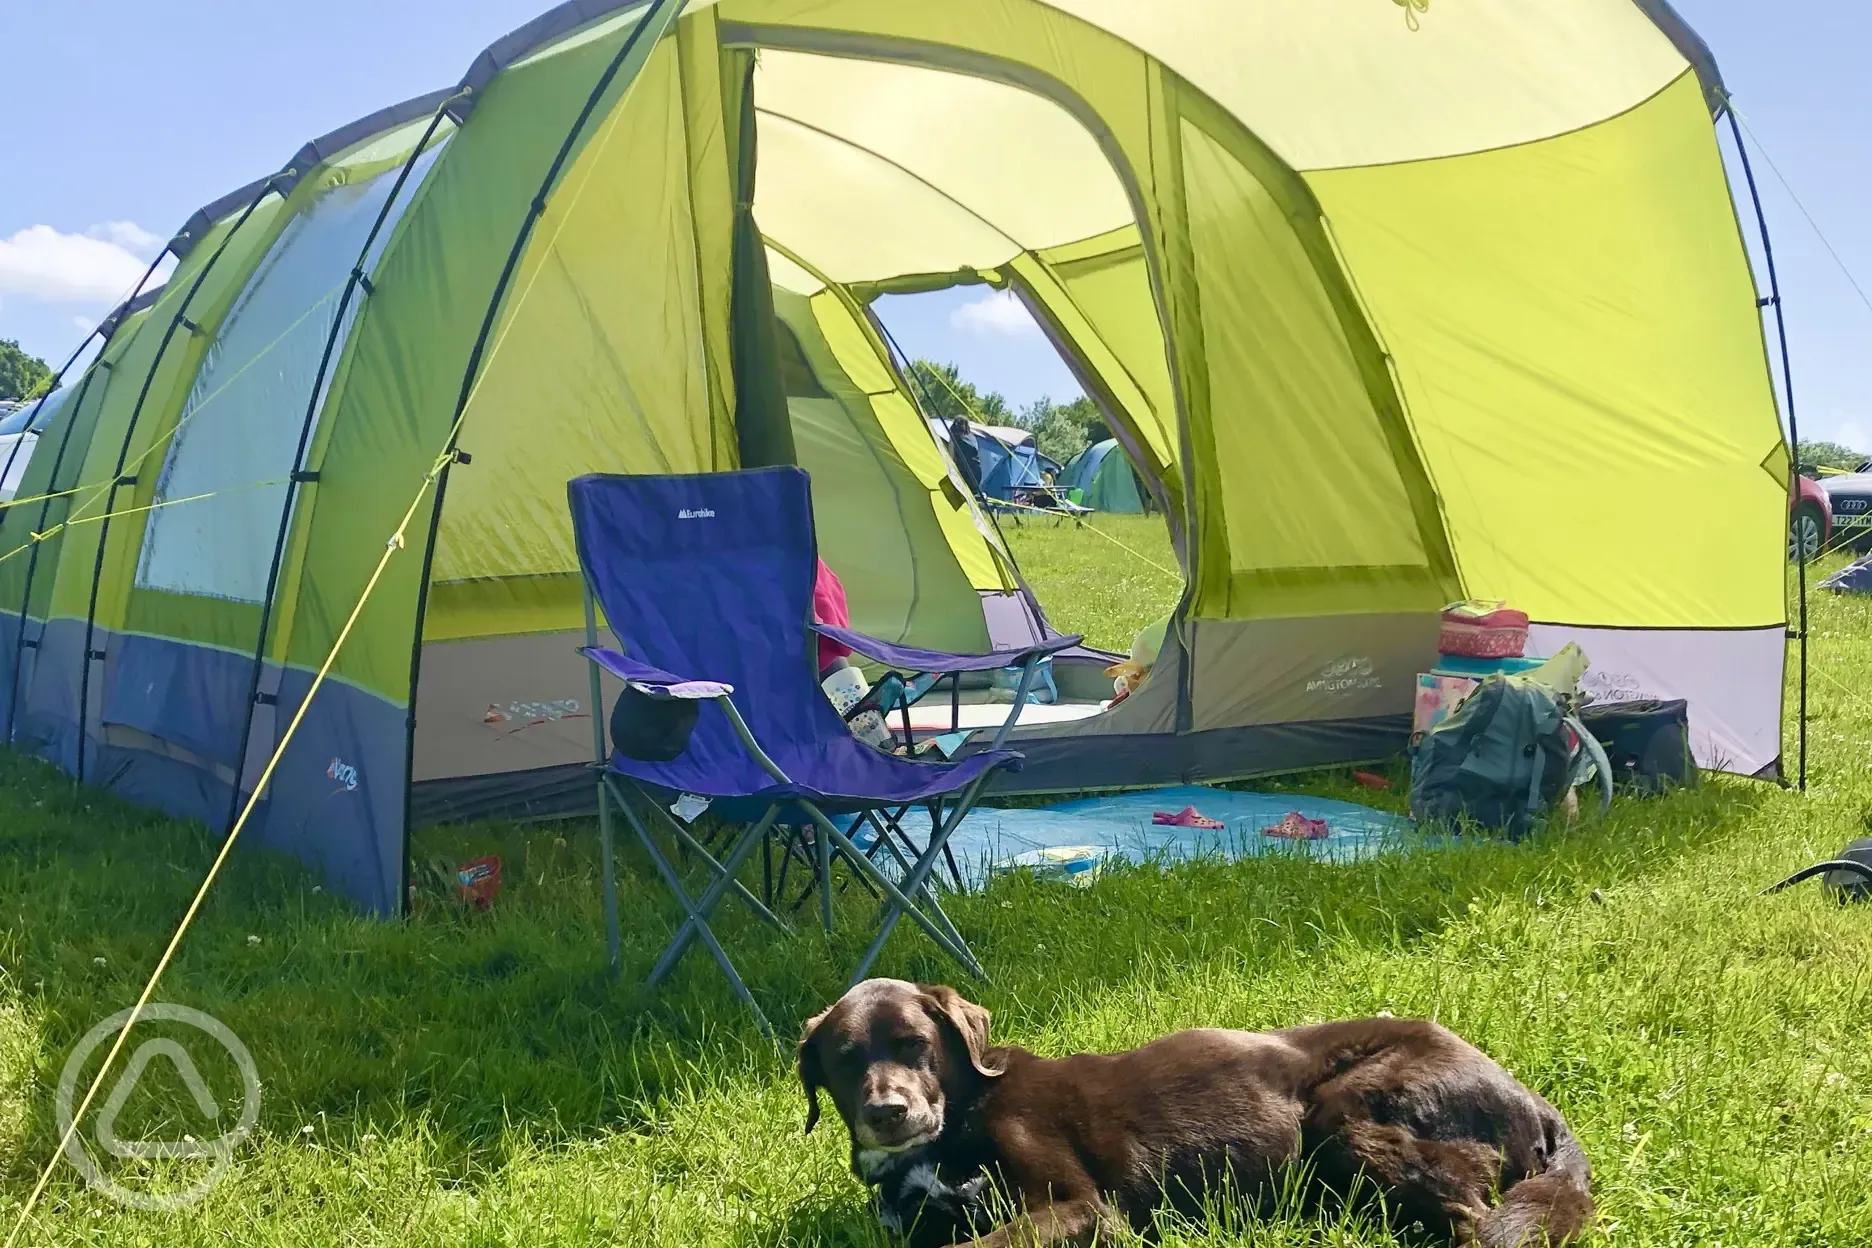 Dog at Bedgebury Camping in front of tent